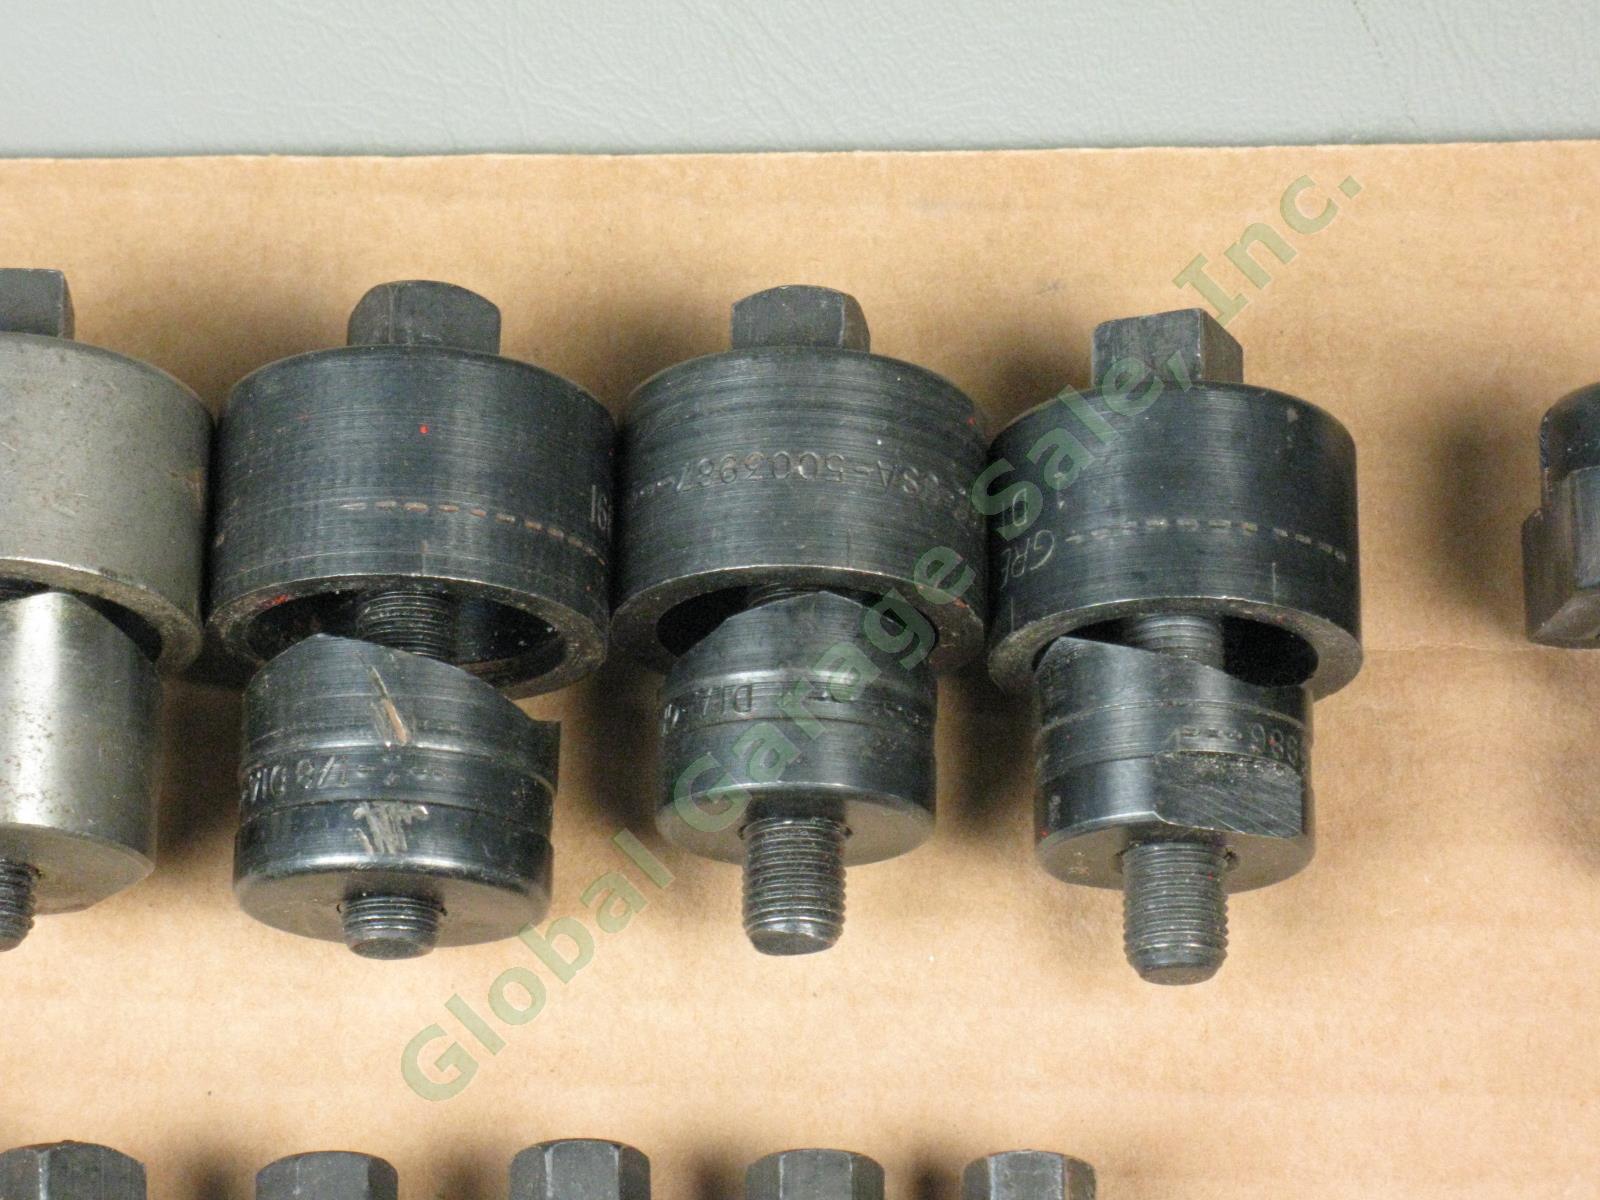 14 Greenlee Round Square Radio Chassis Knockout Punch Lot Set 1 1/2 1/4 3/16 1/8 2